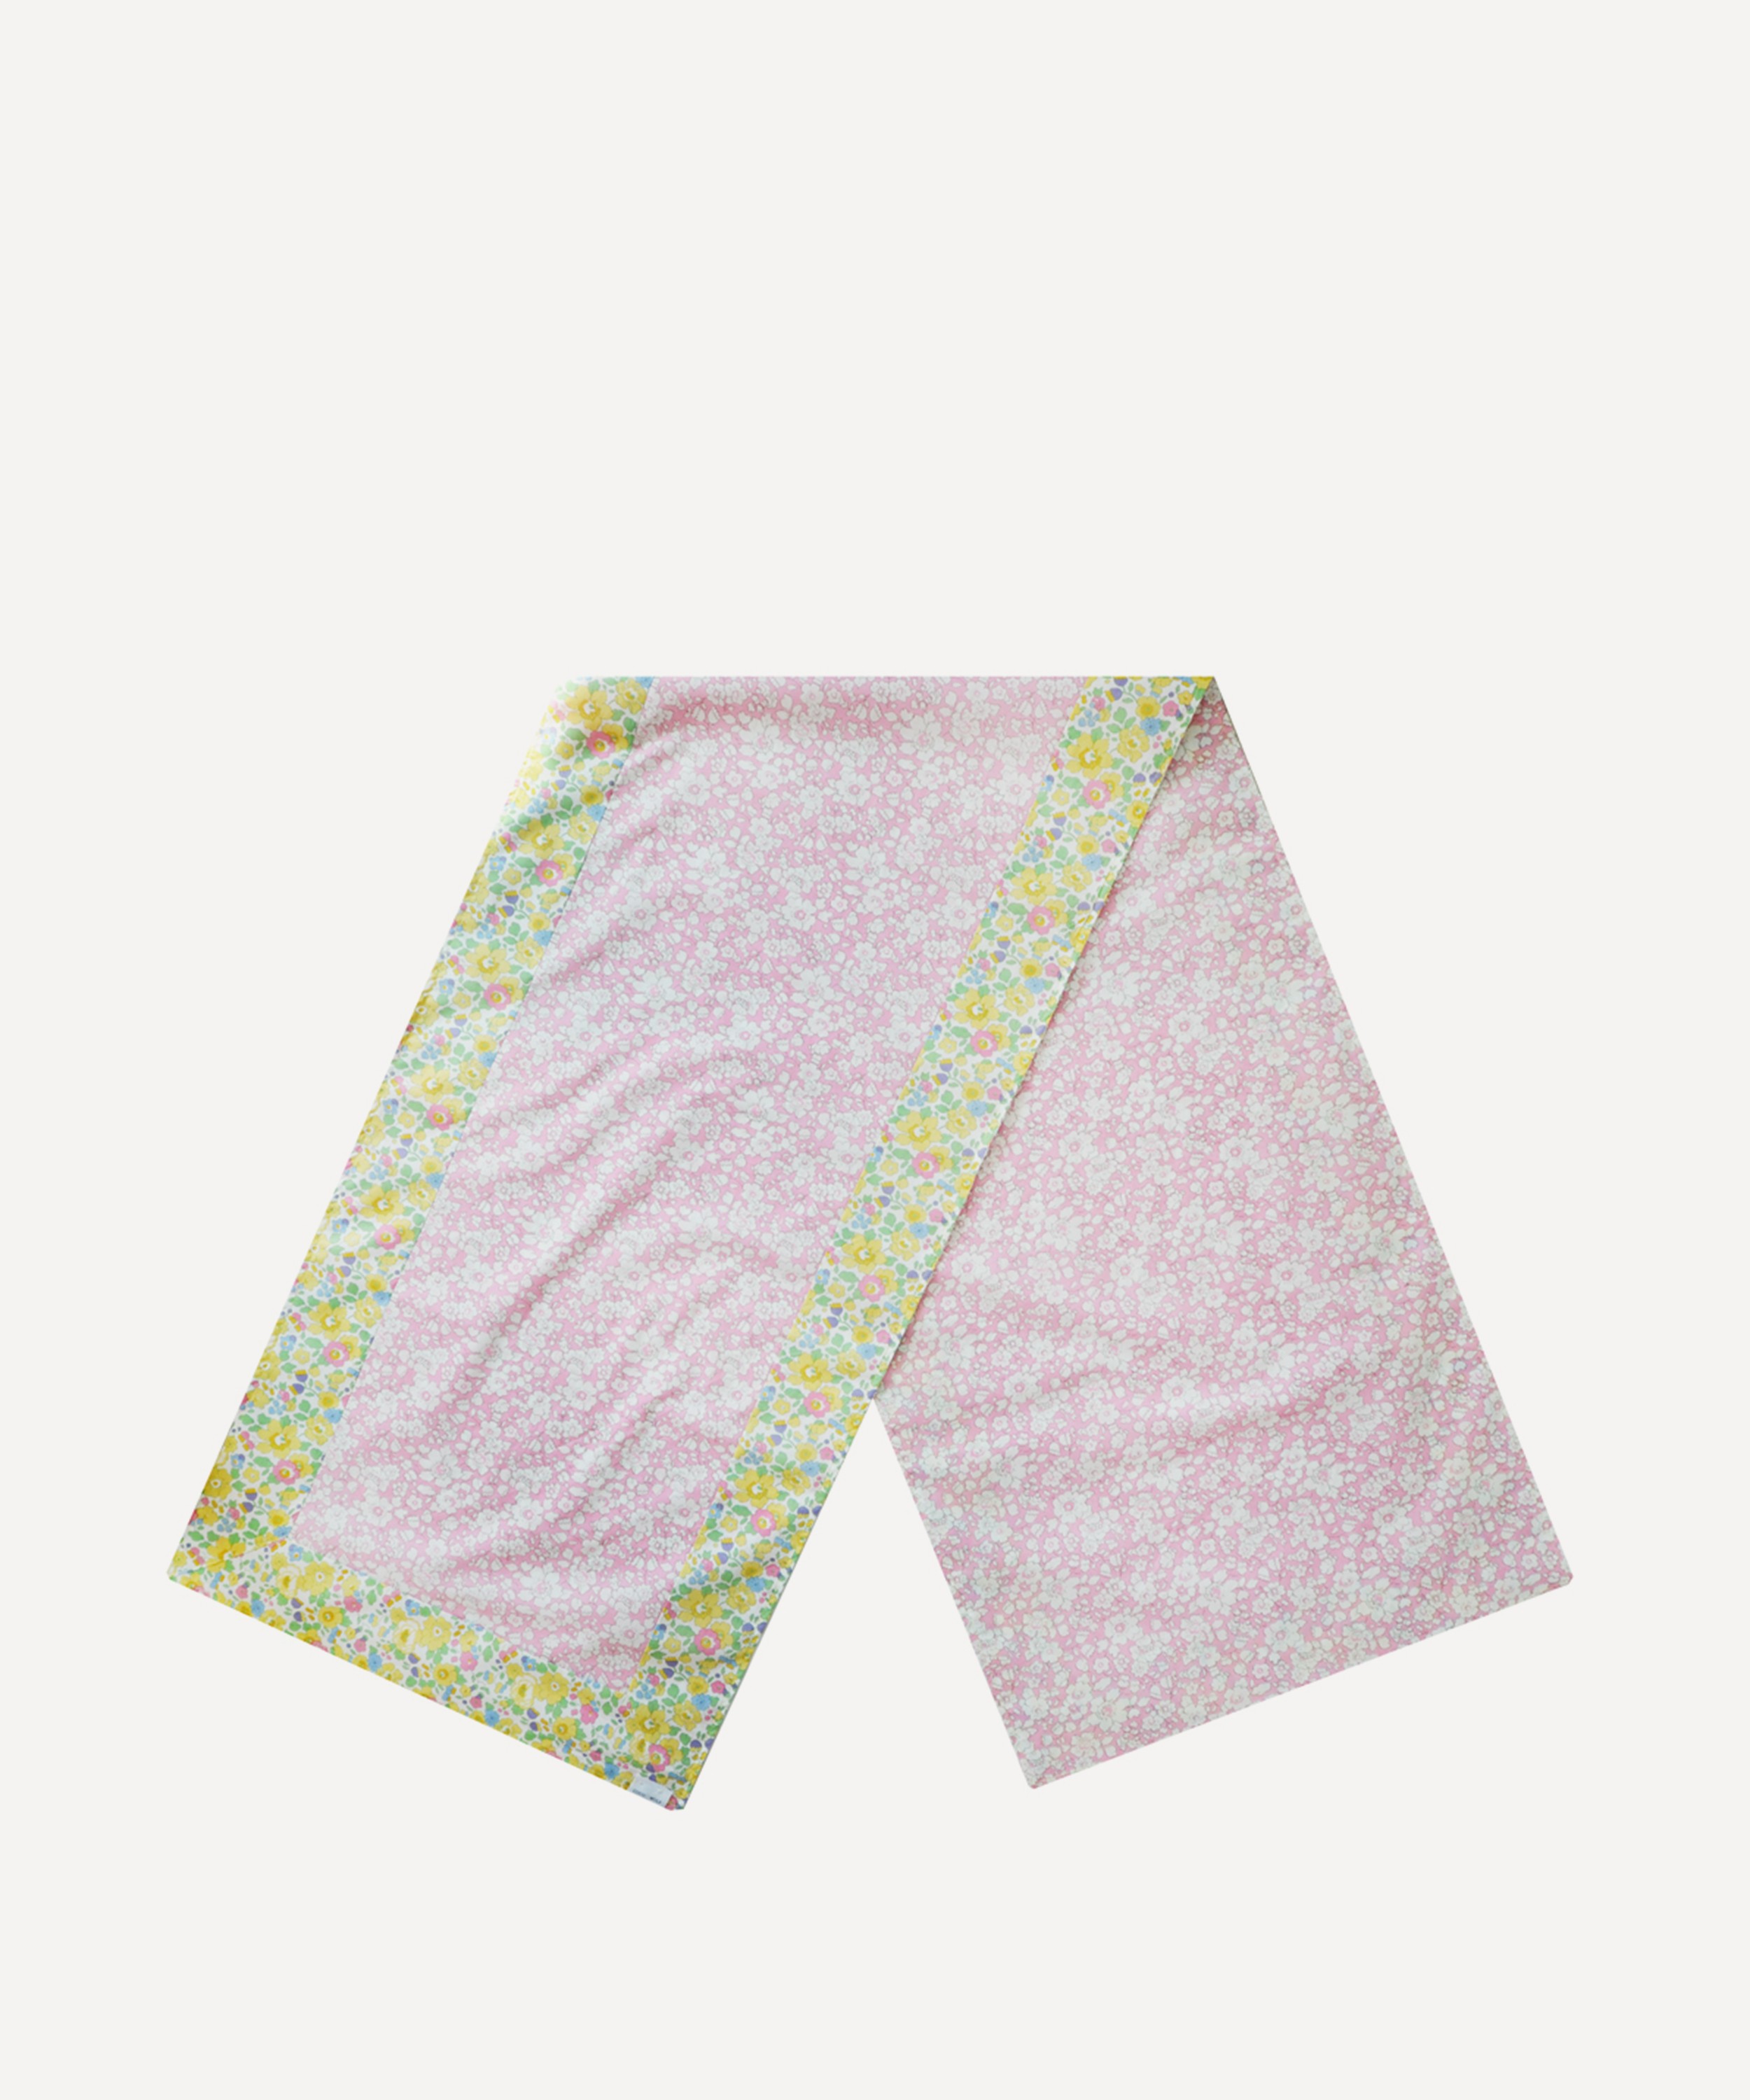 Coco & Wolf - Betsy Boo Bubblegum and Betsy Citrus Bordered Table Runner image number 1